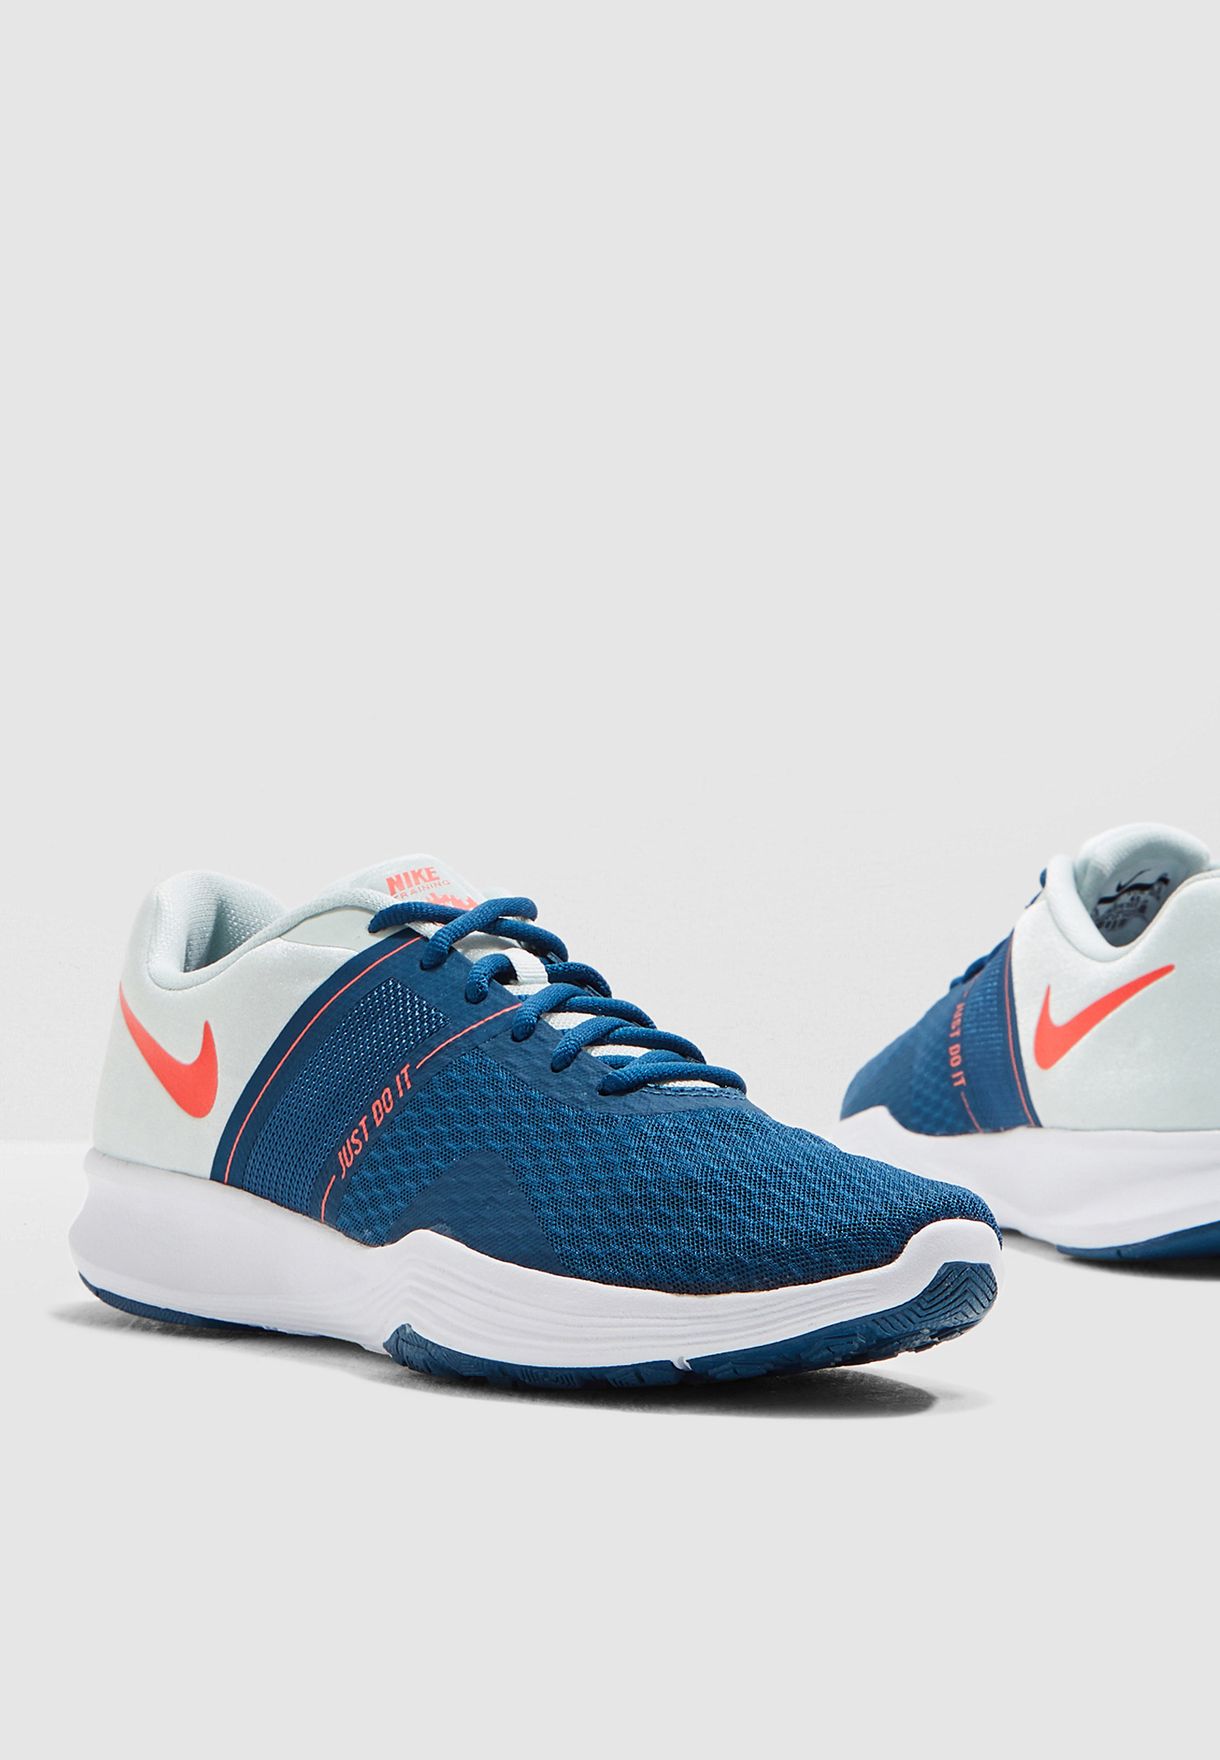 Buy Nike multicolor City Trainer 2 for 